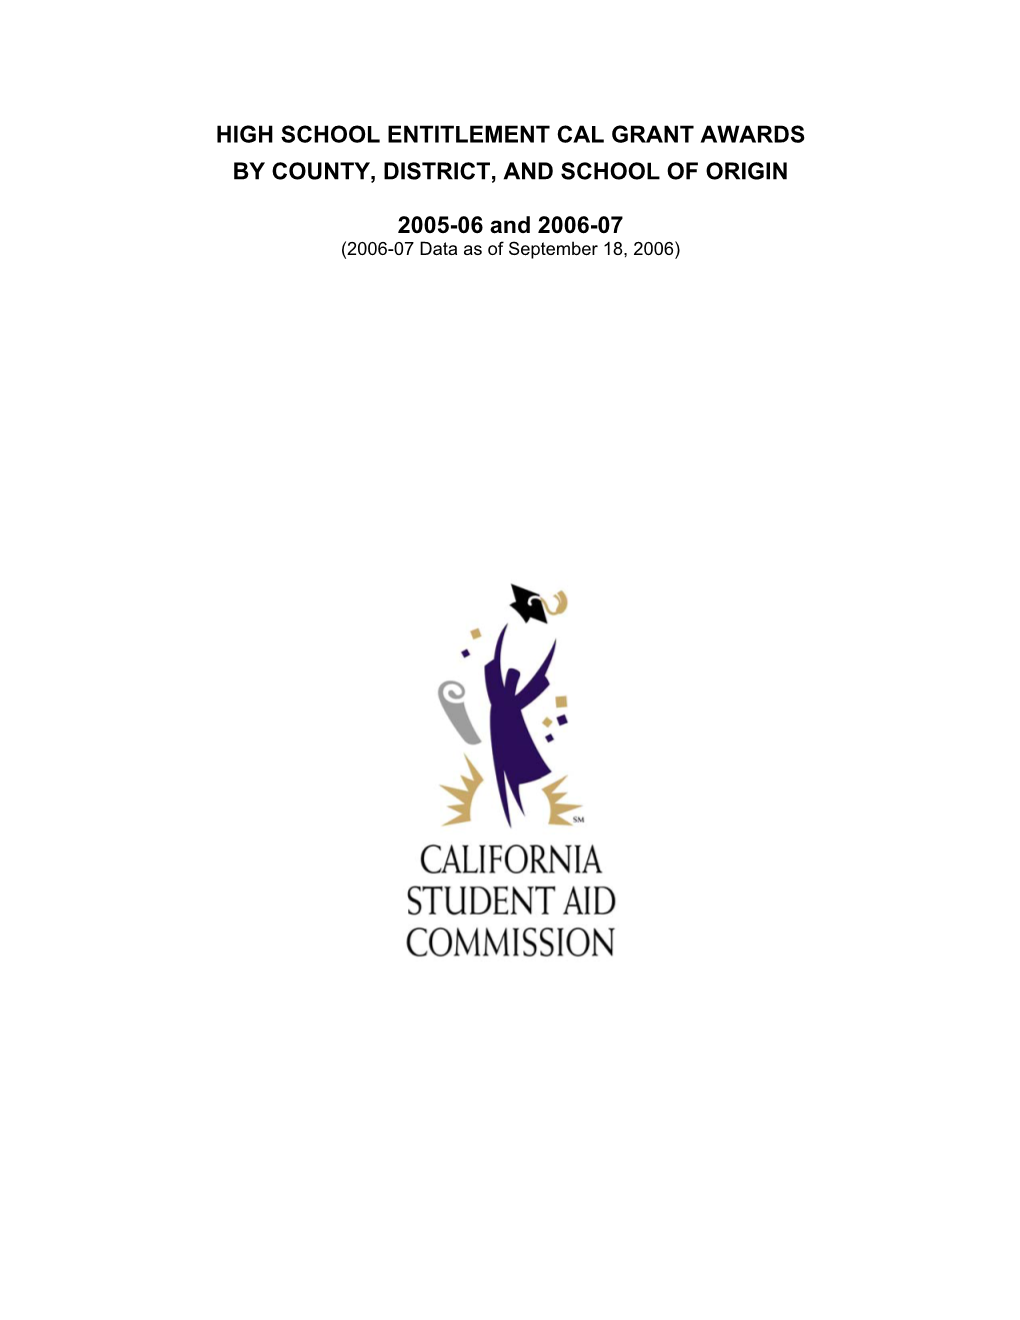 2005-06 & 2006-07 High School Entitlement Cal Grant Awards By